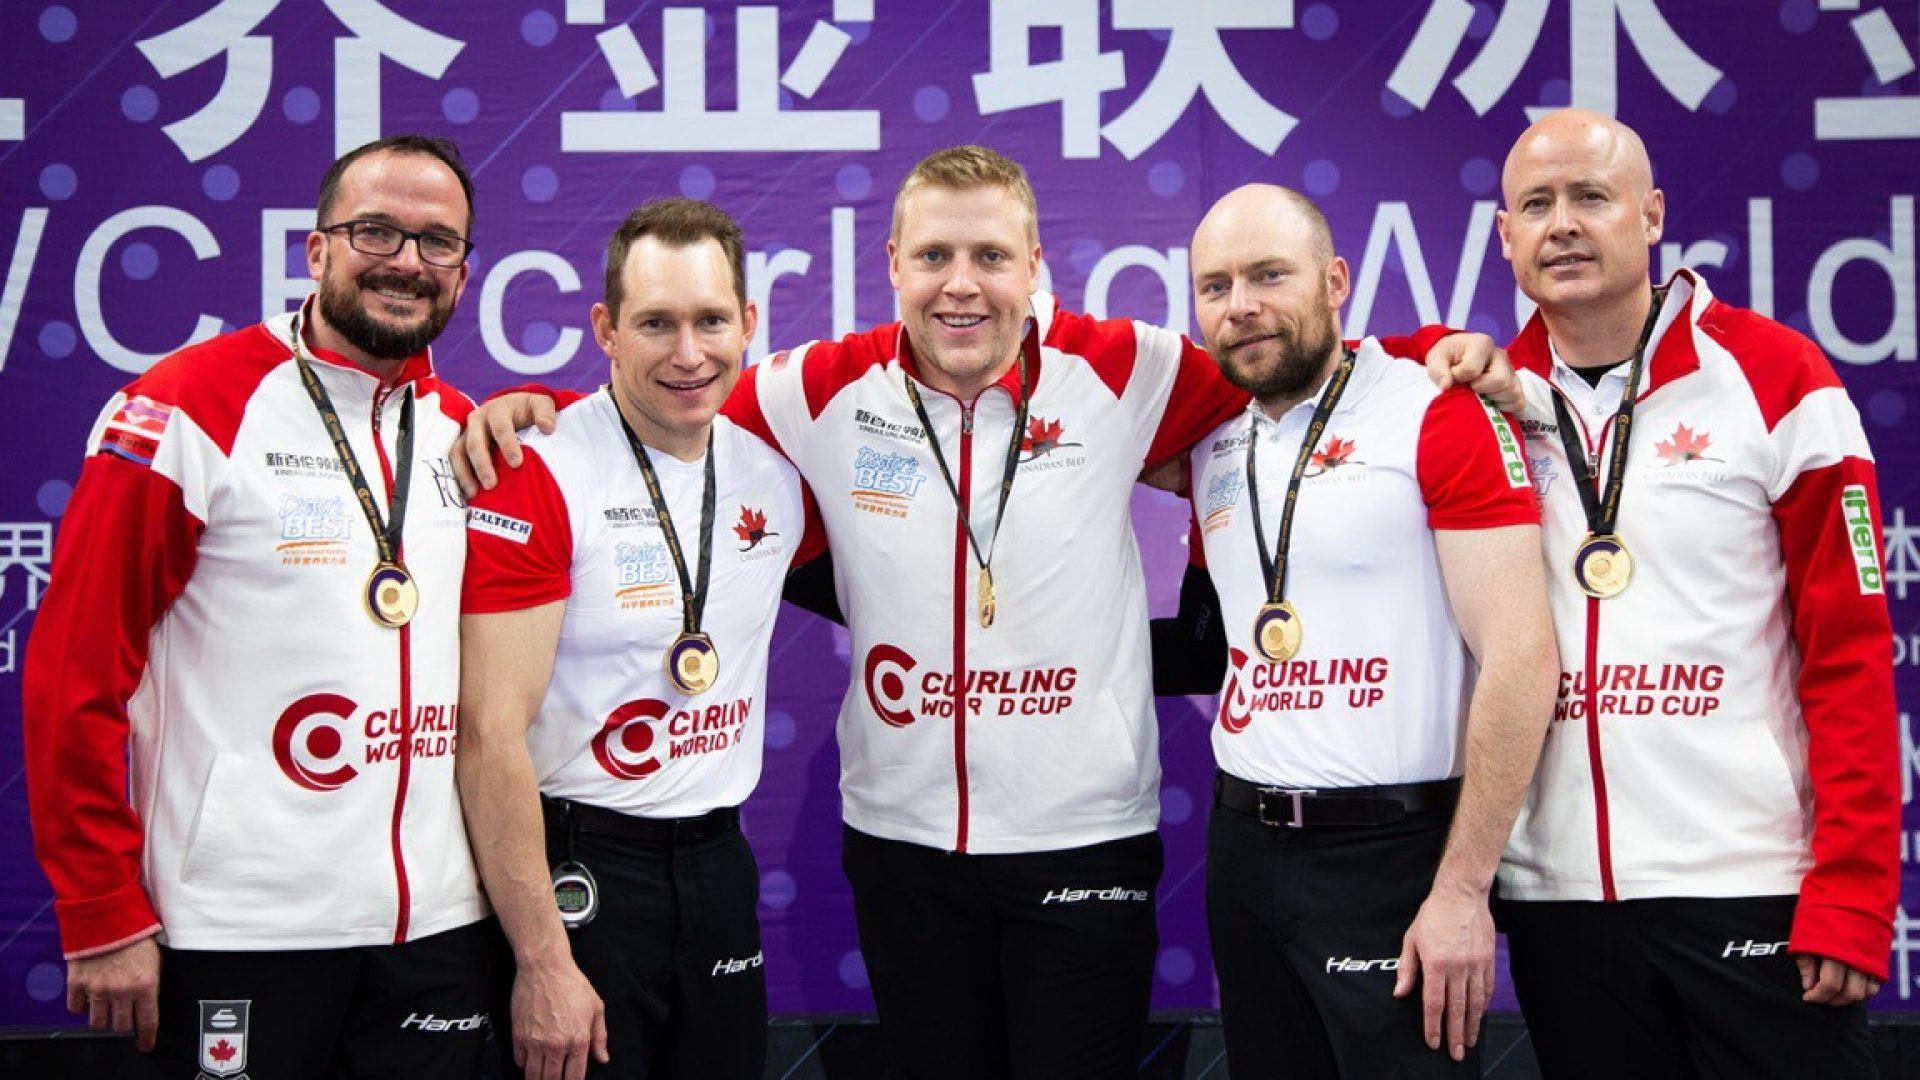 Canada 2 beat the hosts in the men's final at the Curling World Cup Grand Final in Beijing ©World Curling